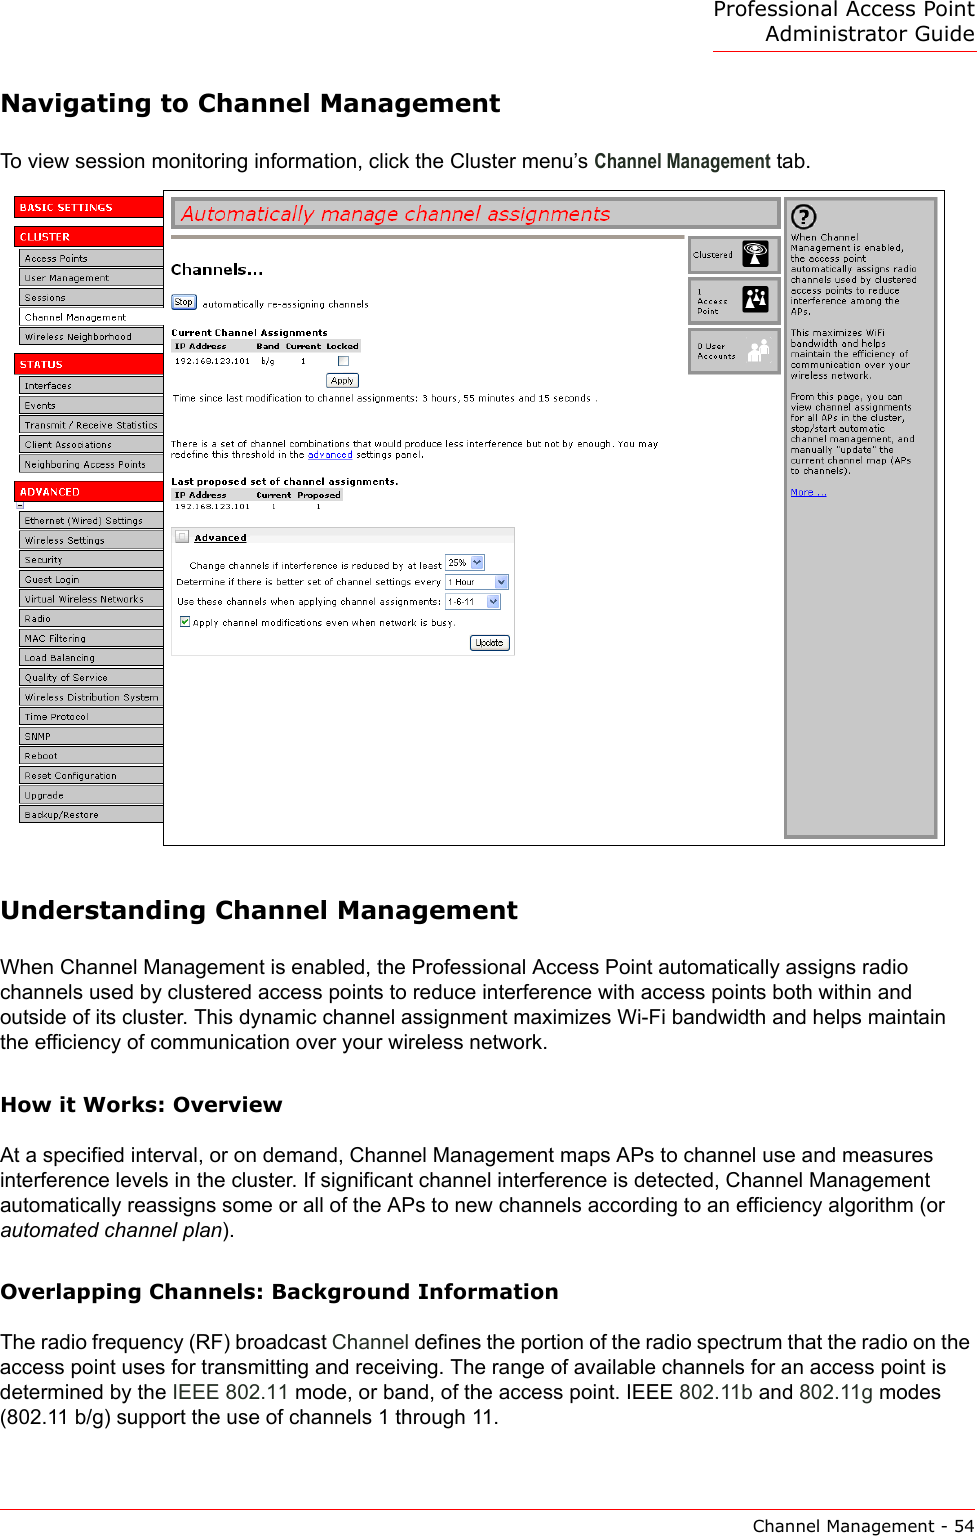 Professional Access Point Administrator GuideChannel Management - 54Navigating to Channel ManagementTo view session monitoring information, click the Cluster menu’s Channel Management tab.Understanding Channel ManagementWhen Channel Management is enabled, the Professional Access Point automatically assigns radio channels used by clustered access points to reduce interference with access points both within and outside of its cluster. This dynamic channel assignment maximizes Wi-Fi bandwidth and helps maintain the efficiency of communication over your wireless network.How it Works: OverviewAt a specified interval, or on demand, Channel Management maps APs to channel use and measures interference levels in the cluster. If significant channel interference is detected, Channel Management automatically reassigns some or all of the APs to new channels according to an efficiency algorithm (or automated channel plan).Overlapping Channels: Background InformationThe radio frequency (RF) broadcast Channel defines the portion of the radio spectrum that the radio on the access point uses for transmitting and receiving. The range of available channels for an access point is determined by the IEEE 802.11 mode, or band, of the access point. IEEE 802.11b and 802.11g modes (802.11 b/g) support the use of channels 1 through 11.